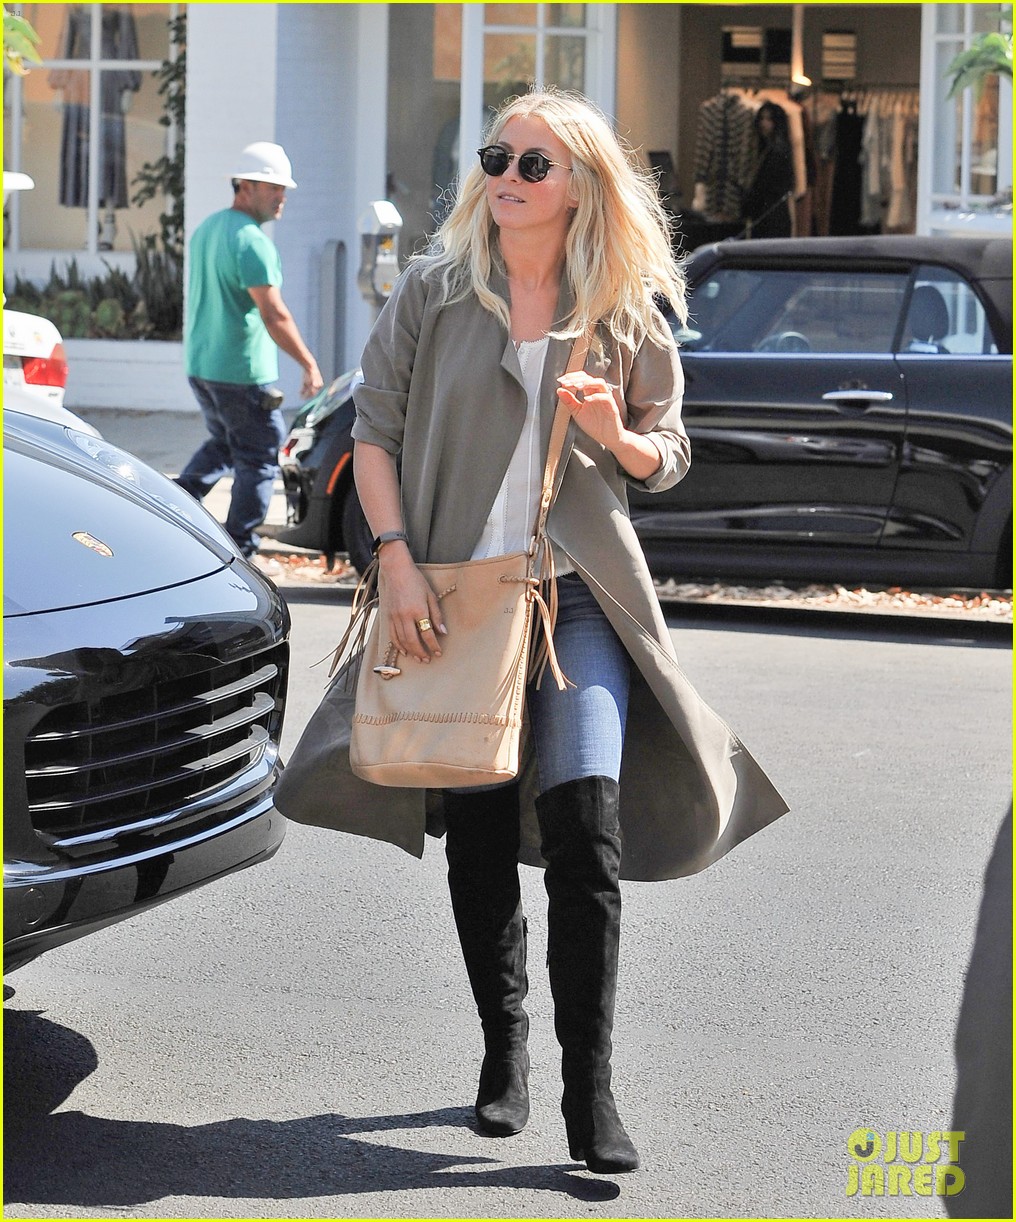 julianne hough enjoys her afternoon shopping19915mytext3760288